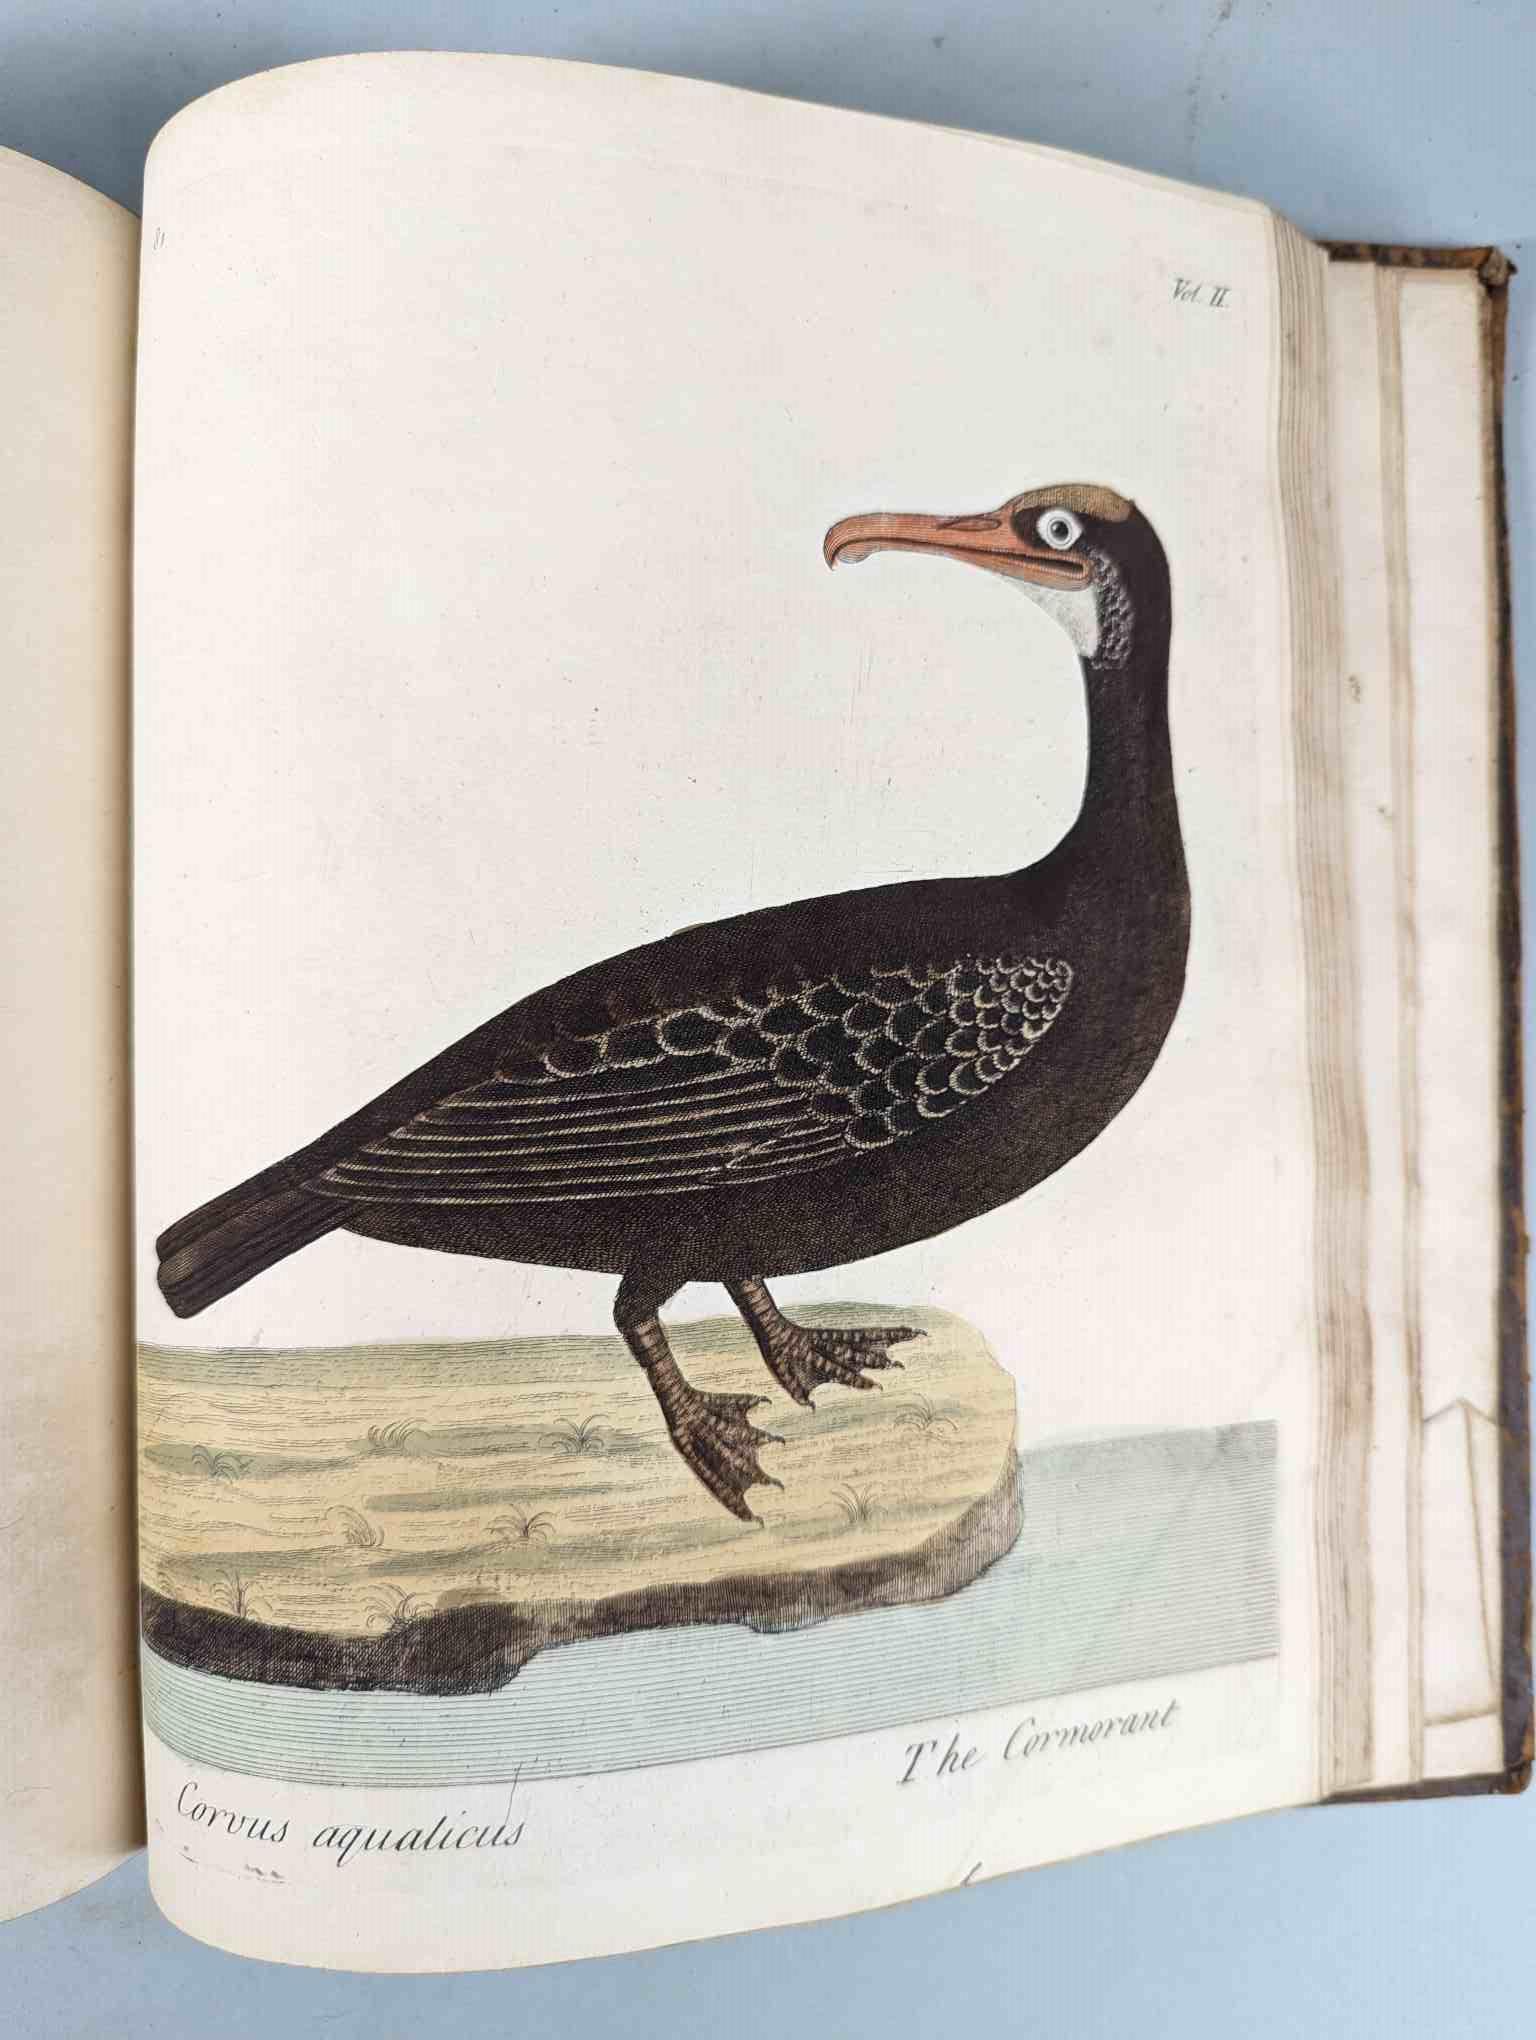 ALBIN, Eleazar. A Natural History of Birds, to which are added, Notes and Observations by W. - Image 185 of 208